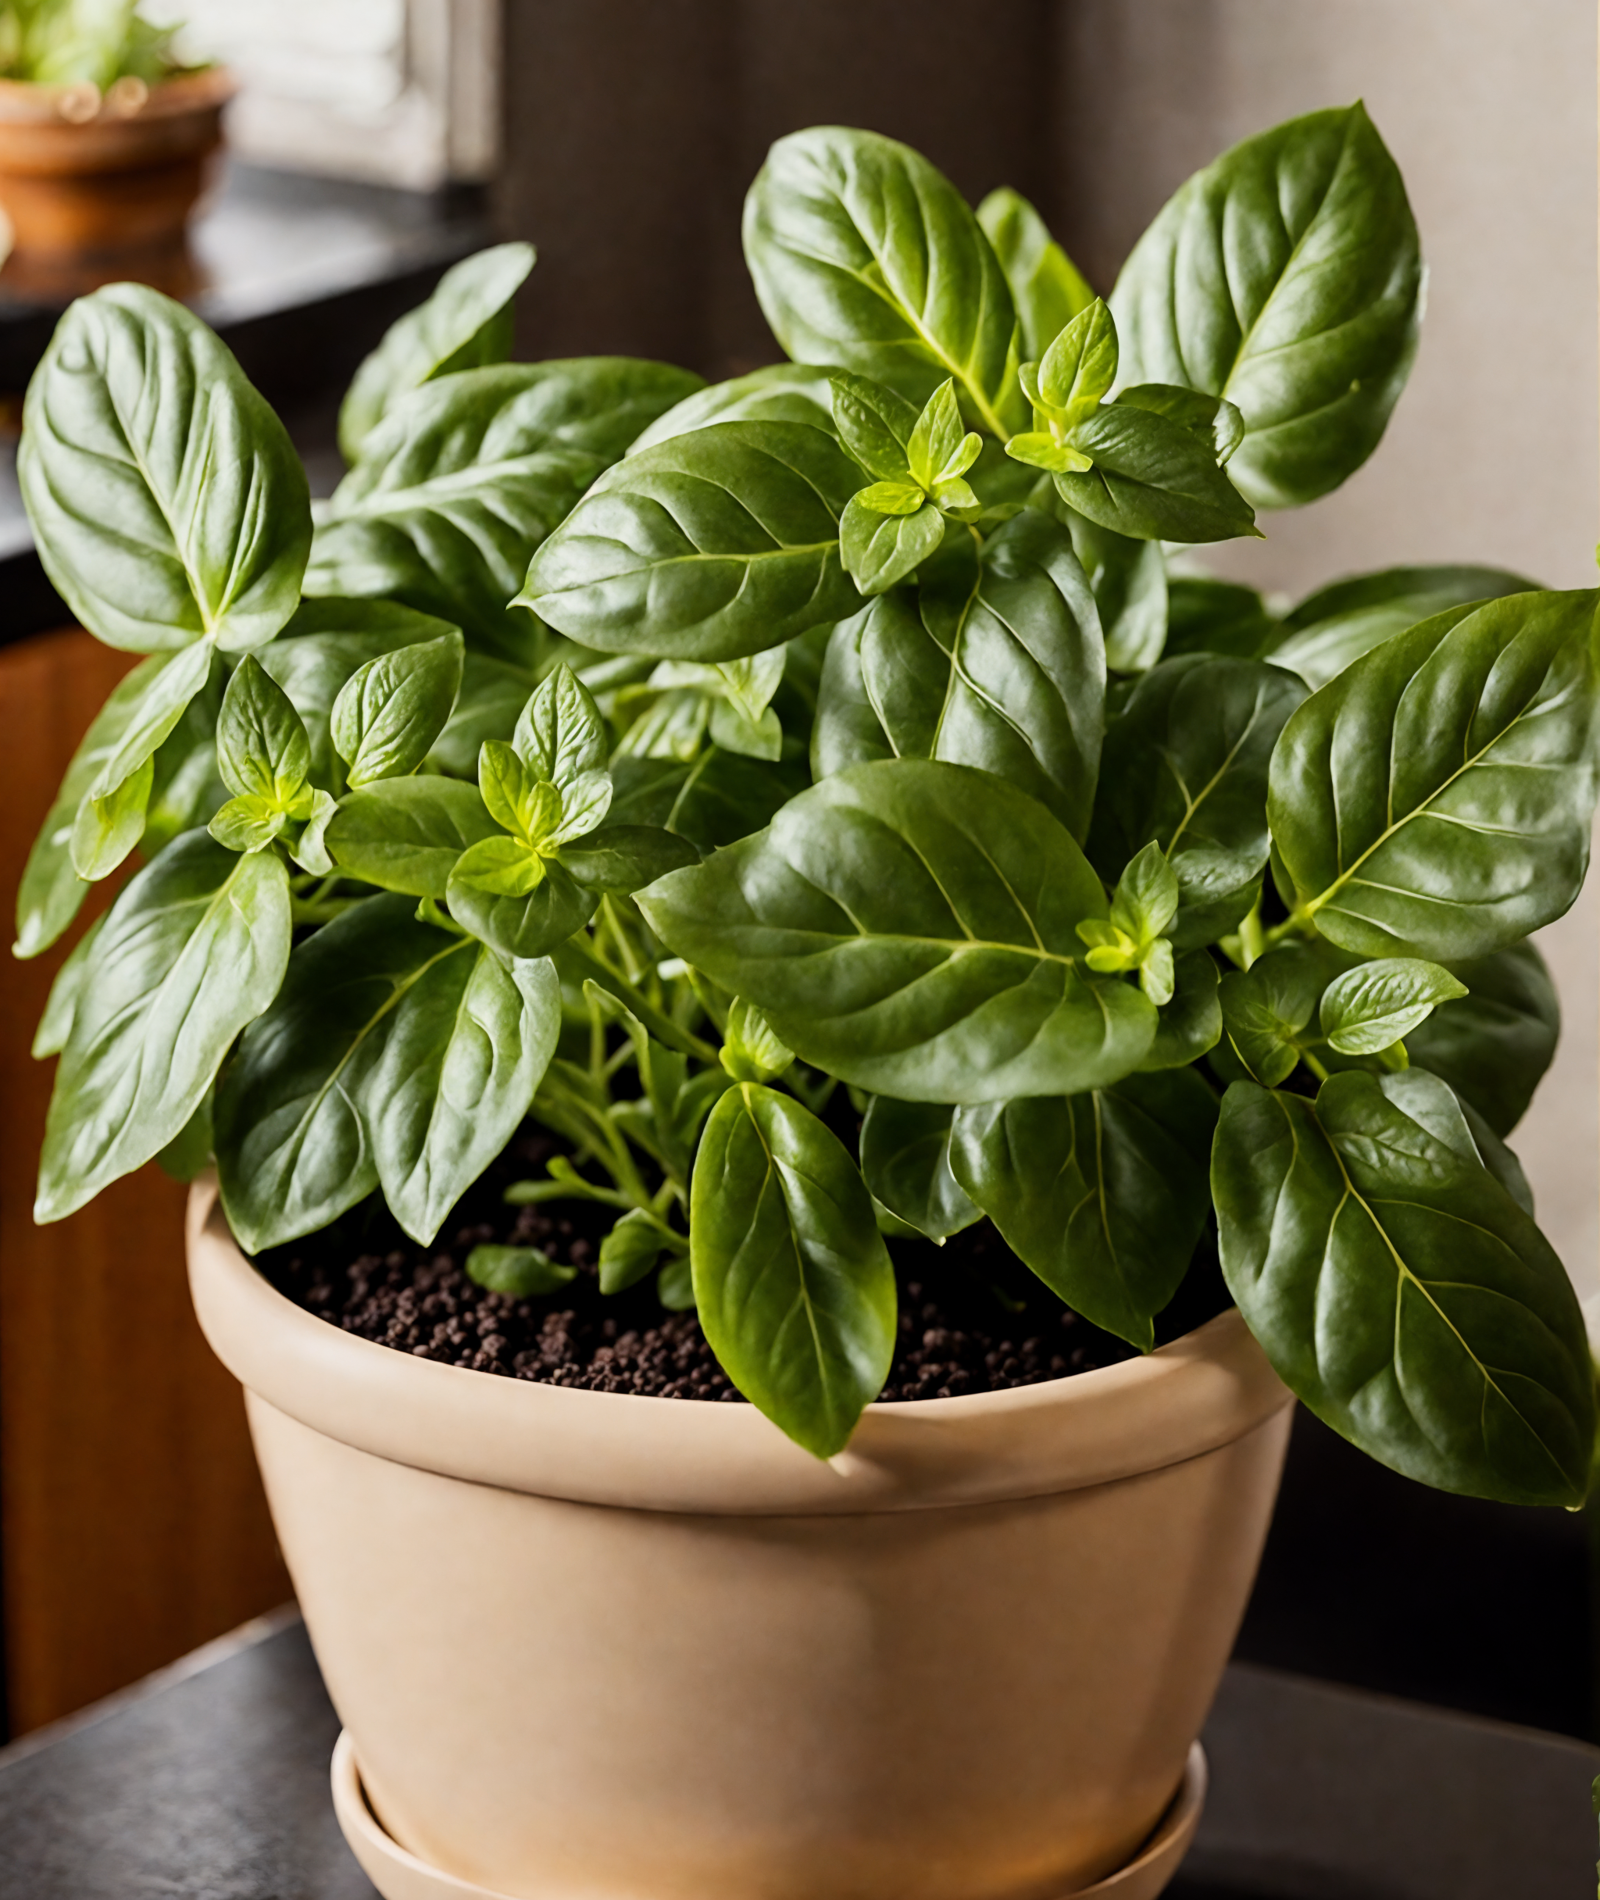 A realistic Ocimum basilicum (basil) plant in a brown bowl, with clear lighting against a dark background.